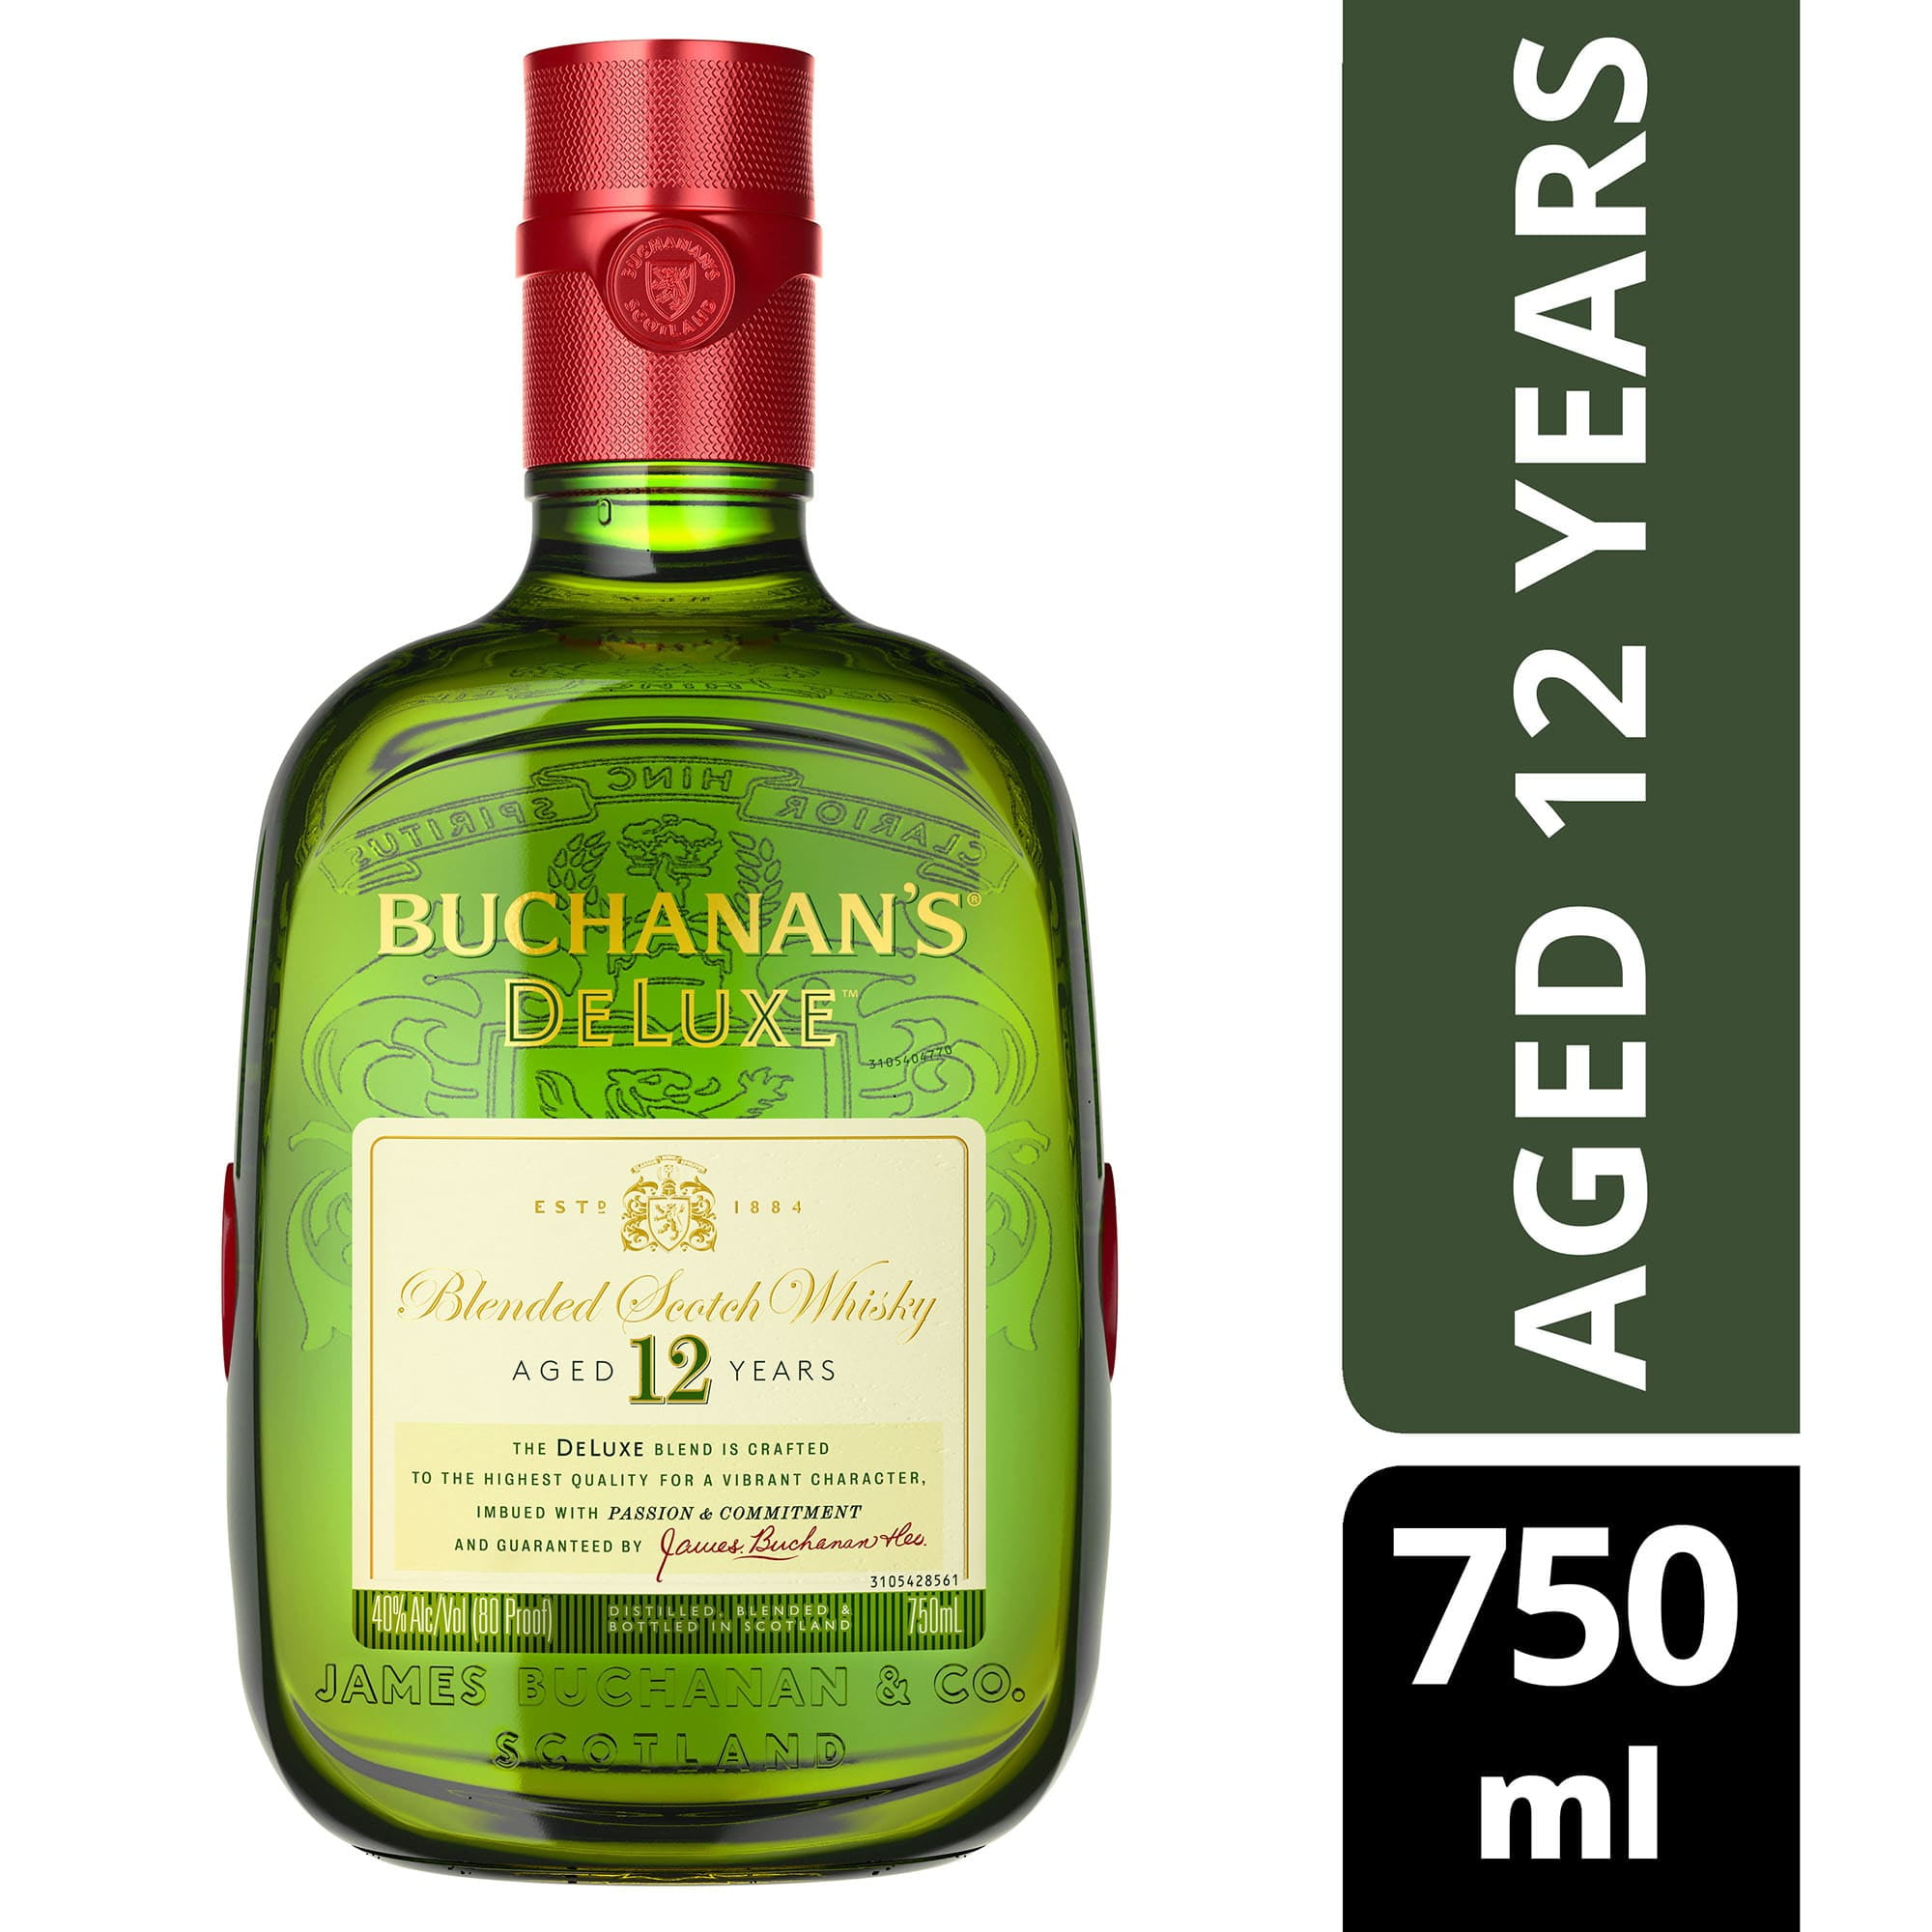 protestante Limo Labe Buchanan's DeLuxe Aged 12 Years Blended Scotch Whisky Special Pack, 750 ml  - Walmart.com